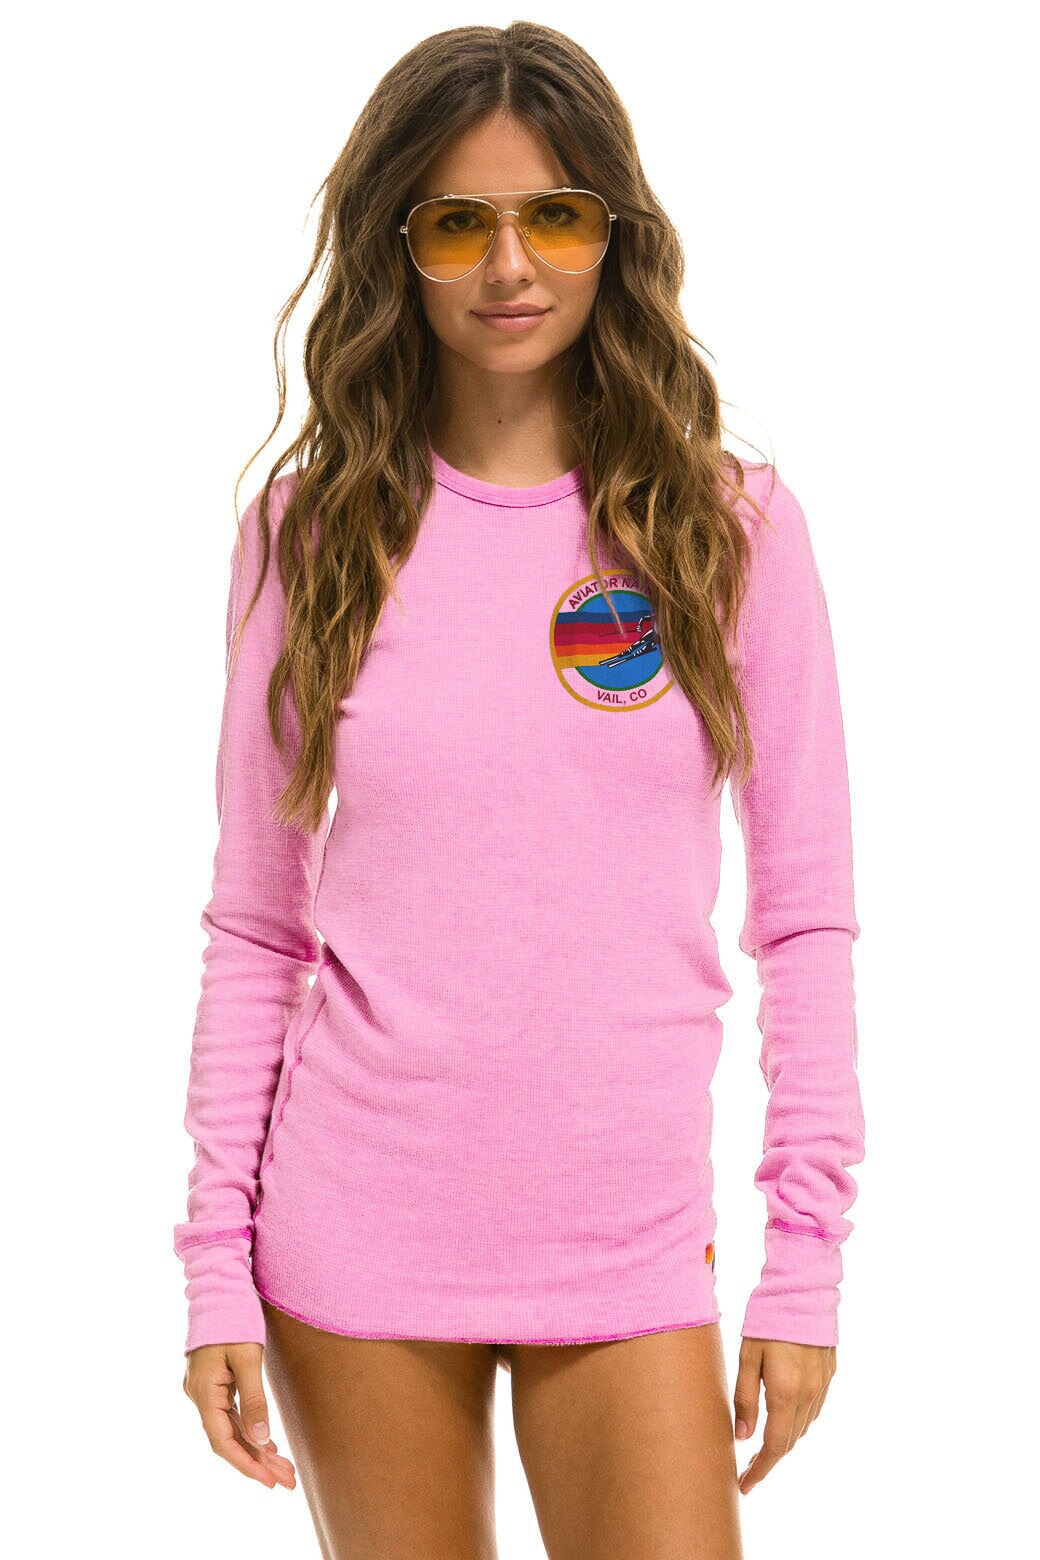 AVIATOR NATION VAIL THERMAL - NEON PINK Thermal Aviator Nation 